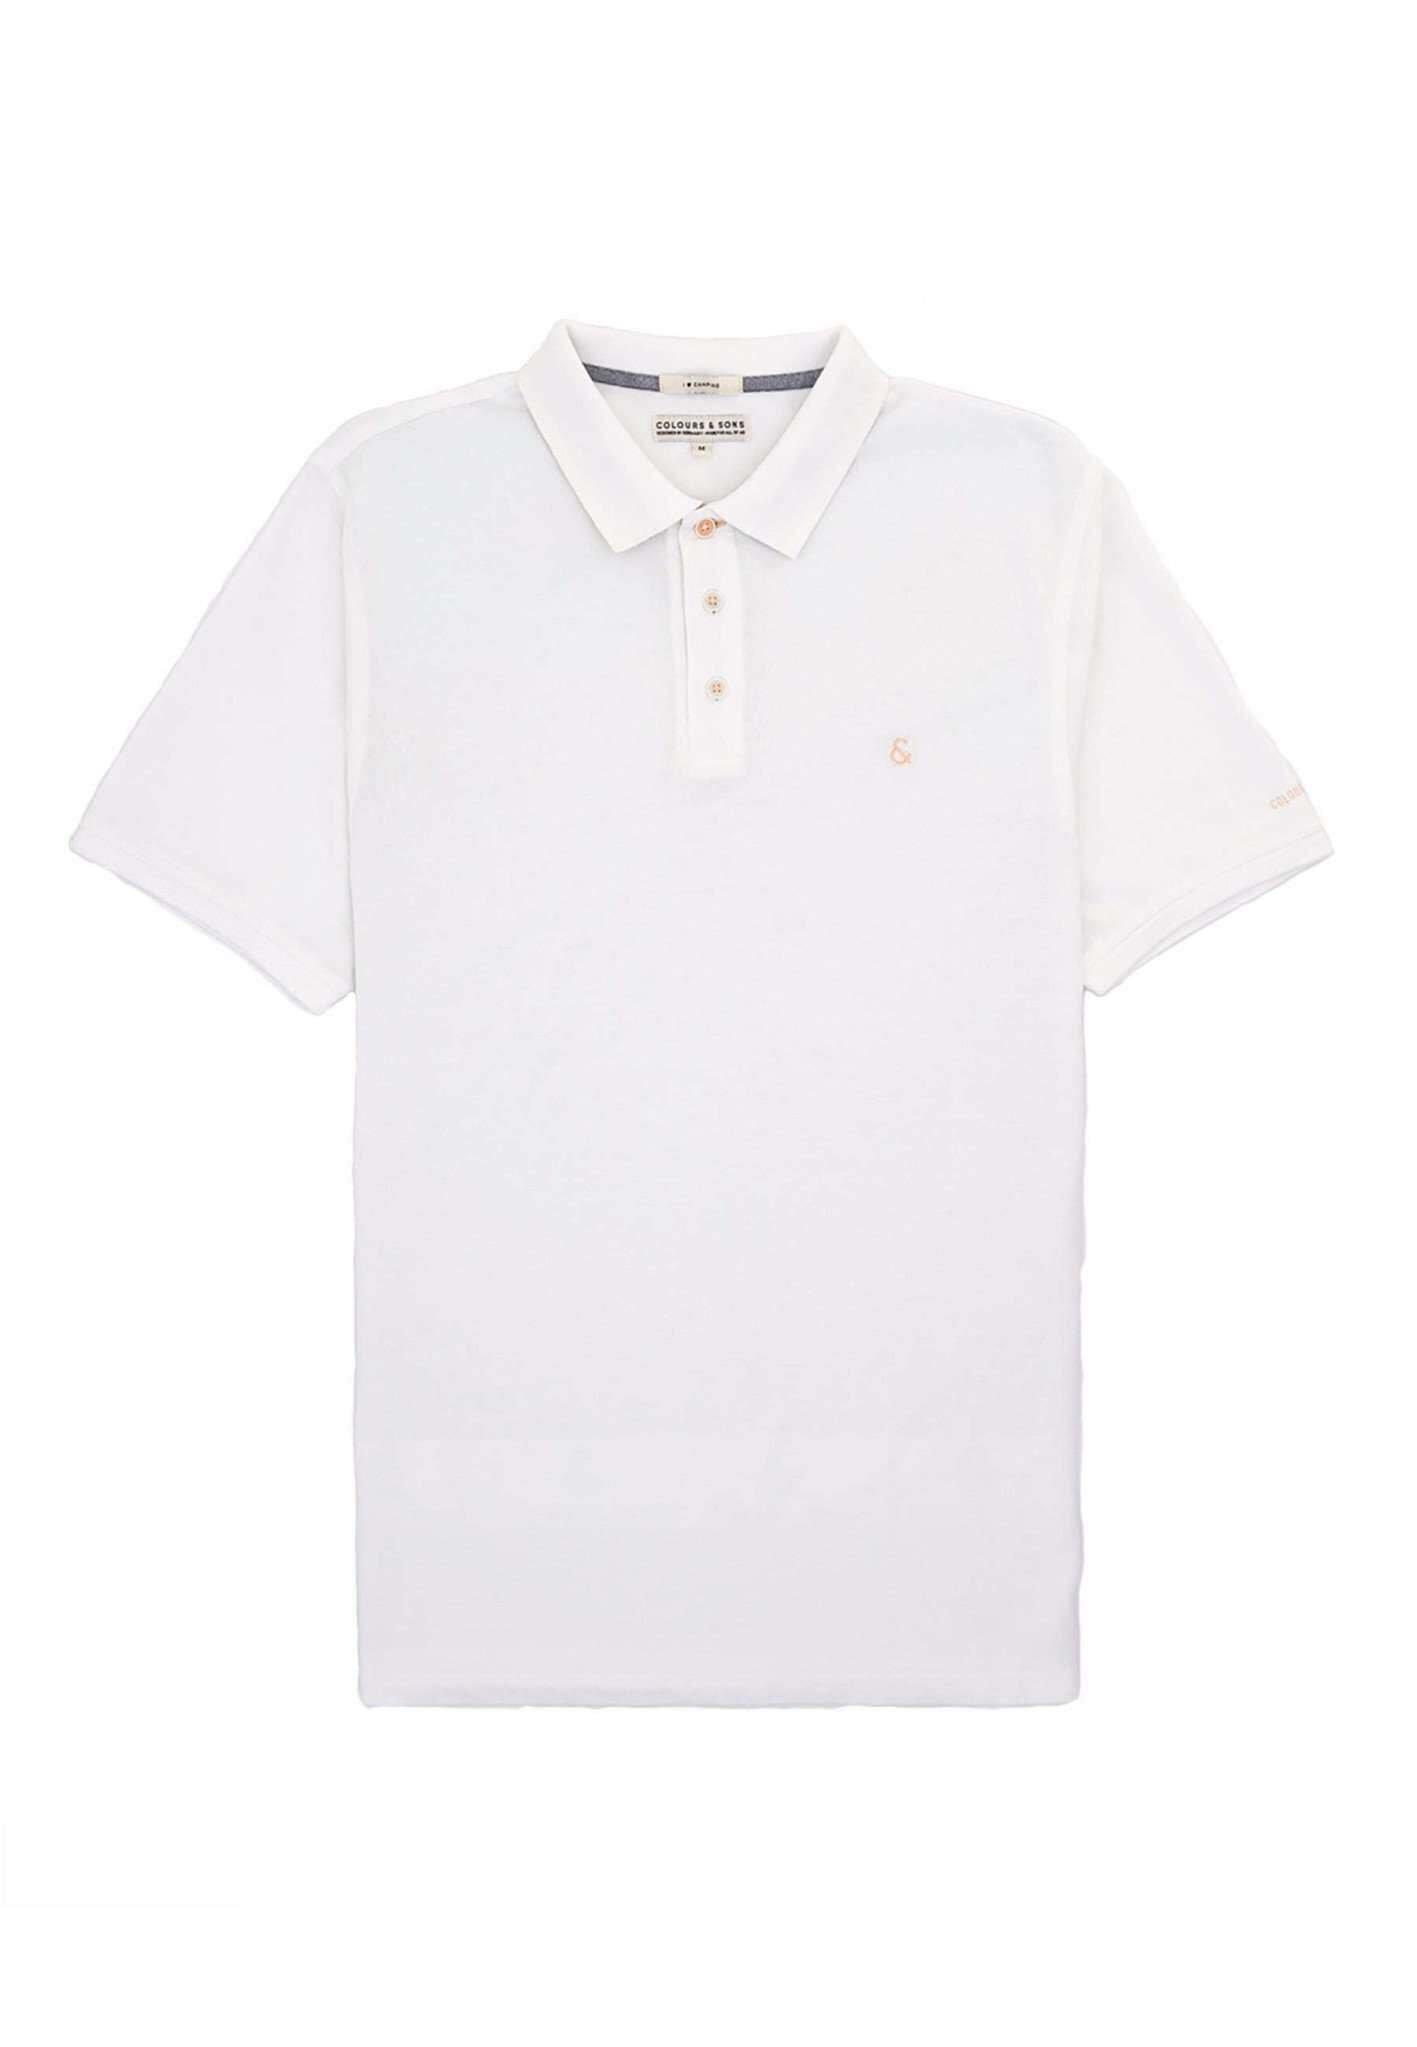 Polos Polo Washed Herren Weiss L von Colours & Sons